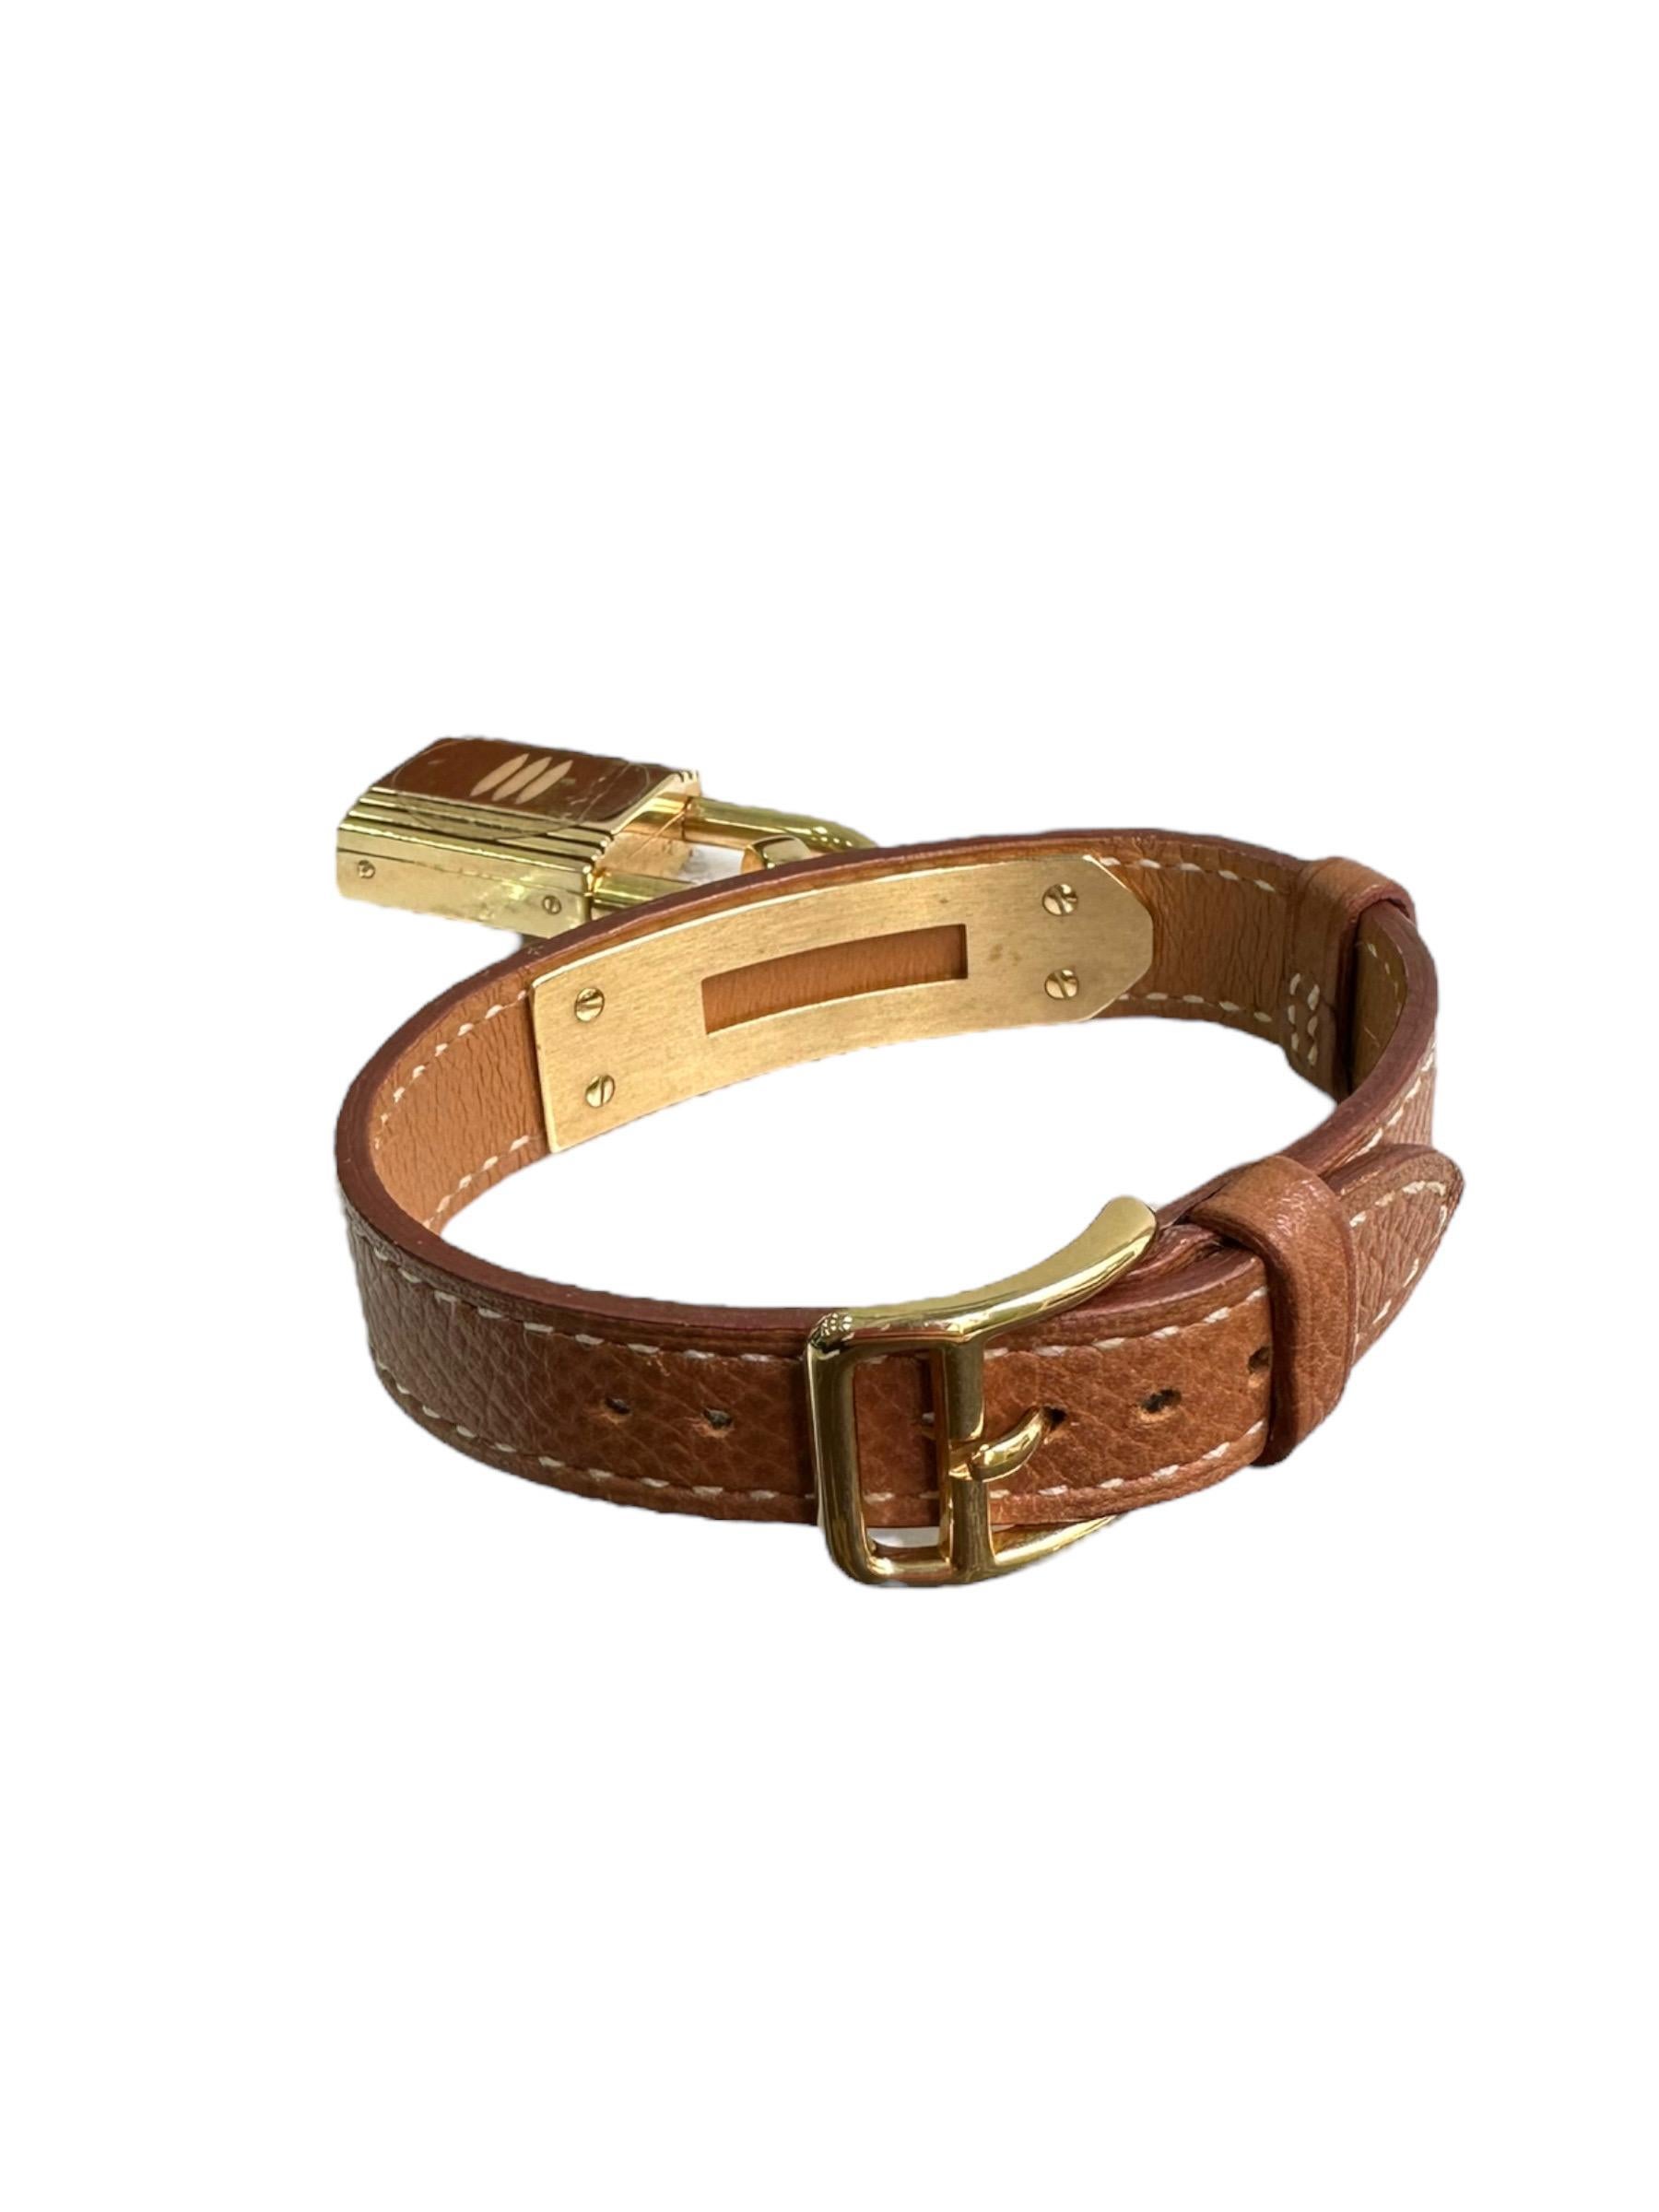 Watch signed Hermès, Kelly model, strap made of Barenia-colored Epsom calfskin with gold-tone hardware. Equipped with a pin buckle closure. Fitted with a rectangular pendant padlock dial without numbers. The strap measures 20cm in length and 1cm in